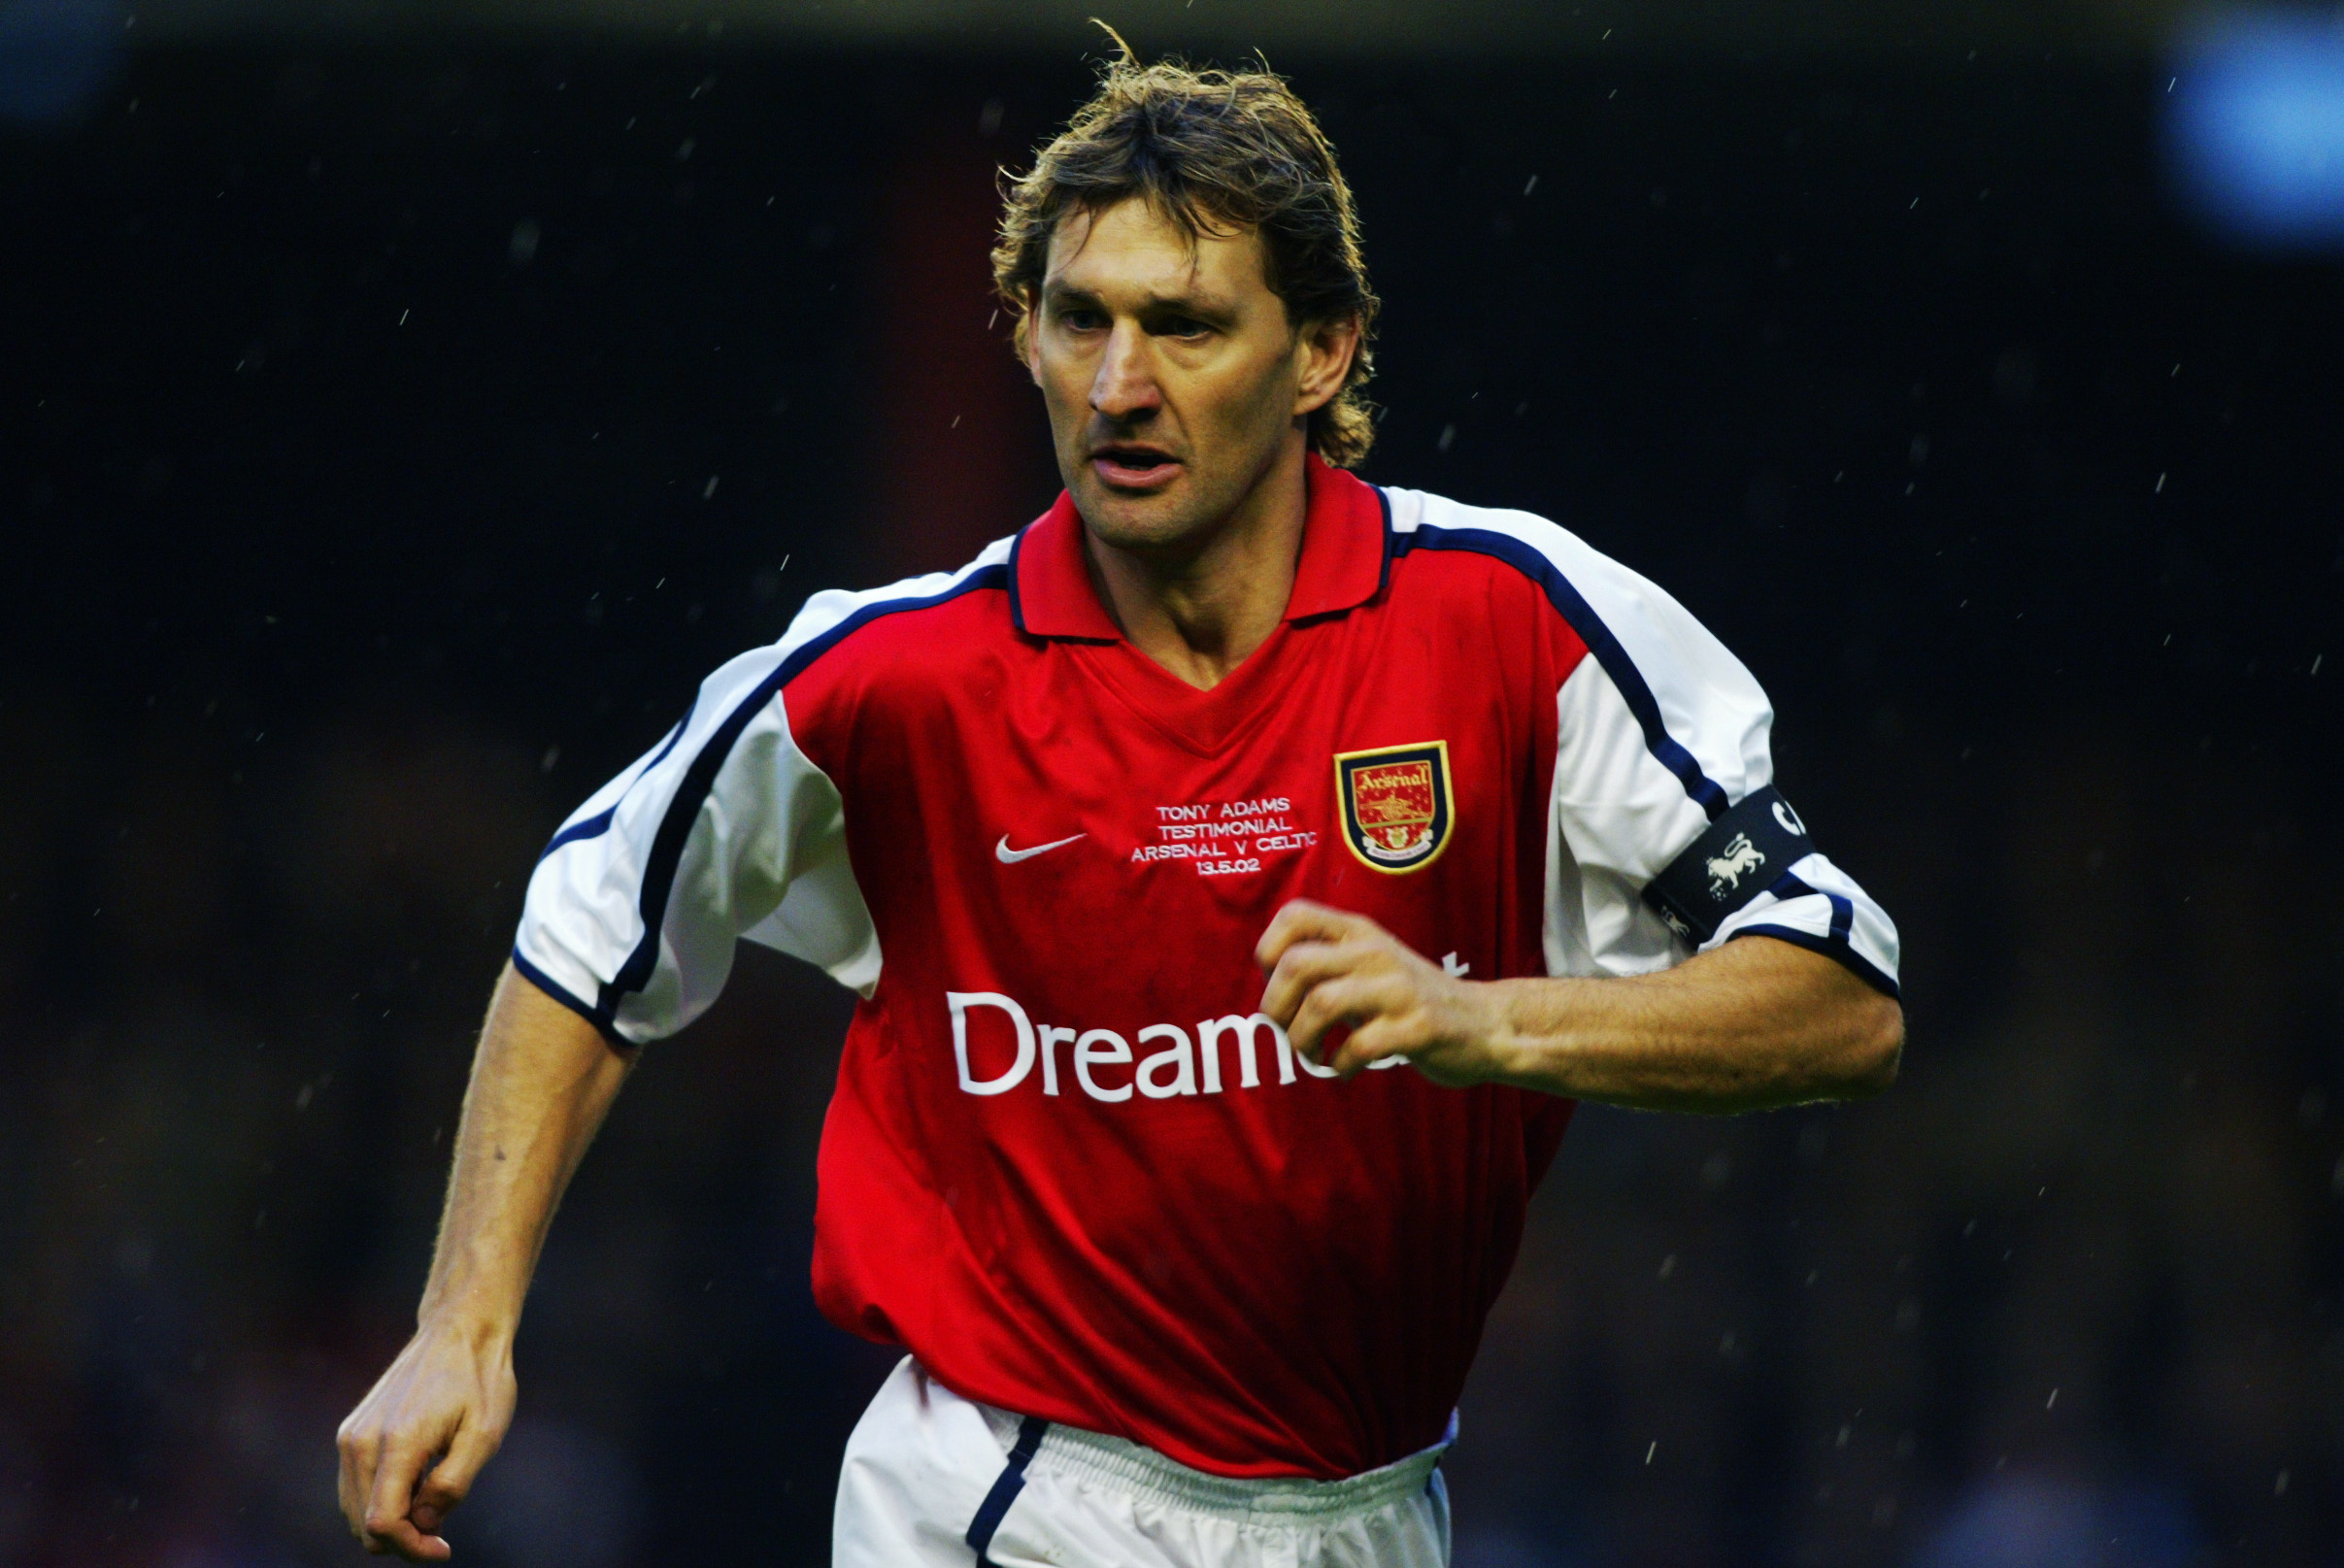 LONDON - MAY 13:  Tony Adams of Arsenal in action during The Tony Adams Testimonial match between Arsenal and Celtic played at Highbury, in London on May 13, 2002. The match ended in a 1-1 draw. DIGITAL IMAGE. (Photo by Ben Radford/Getty Images)